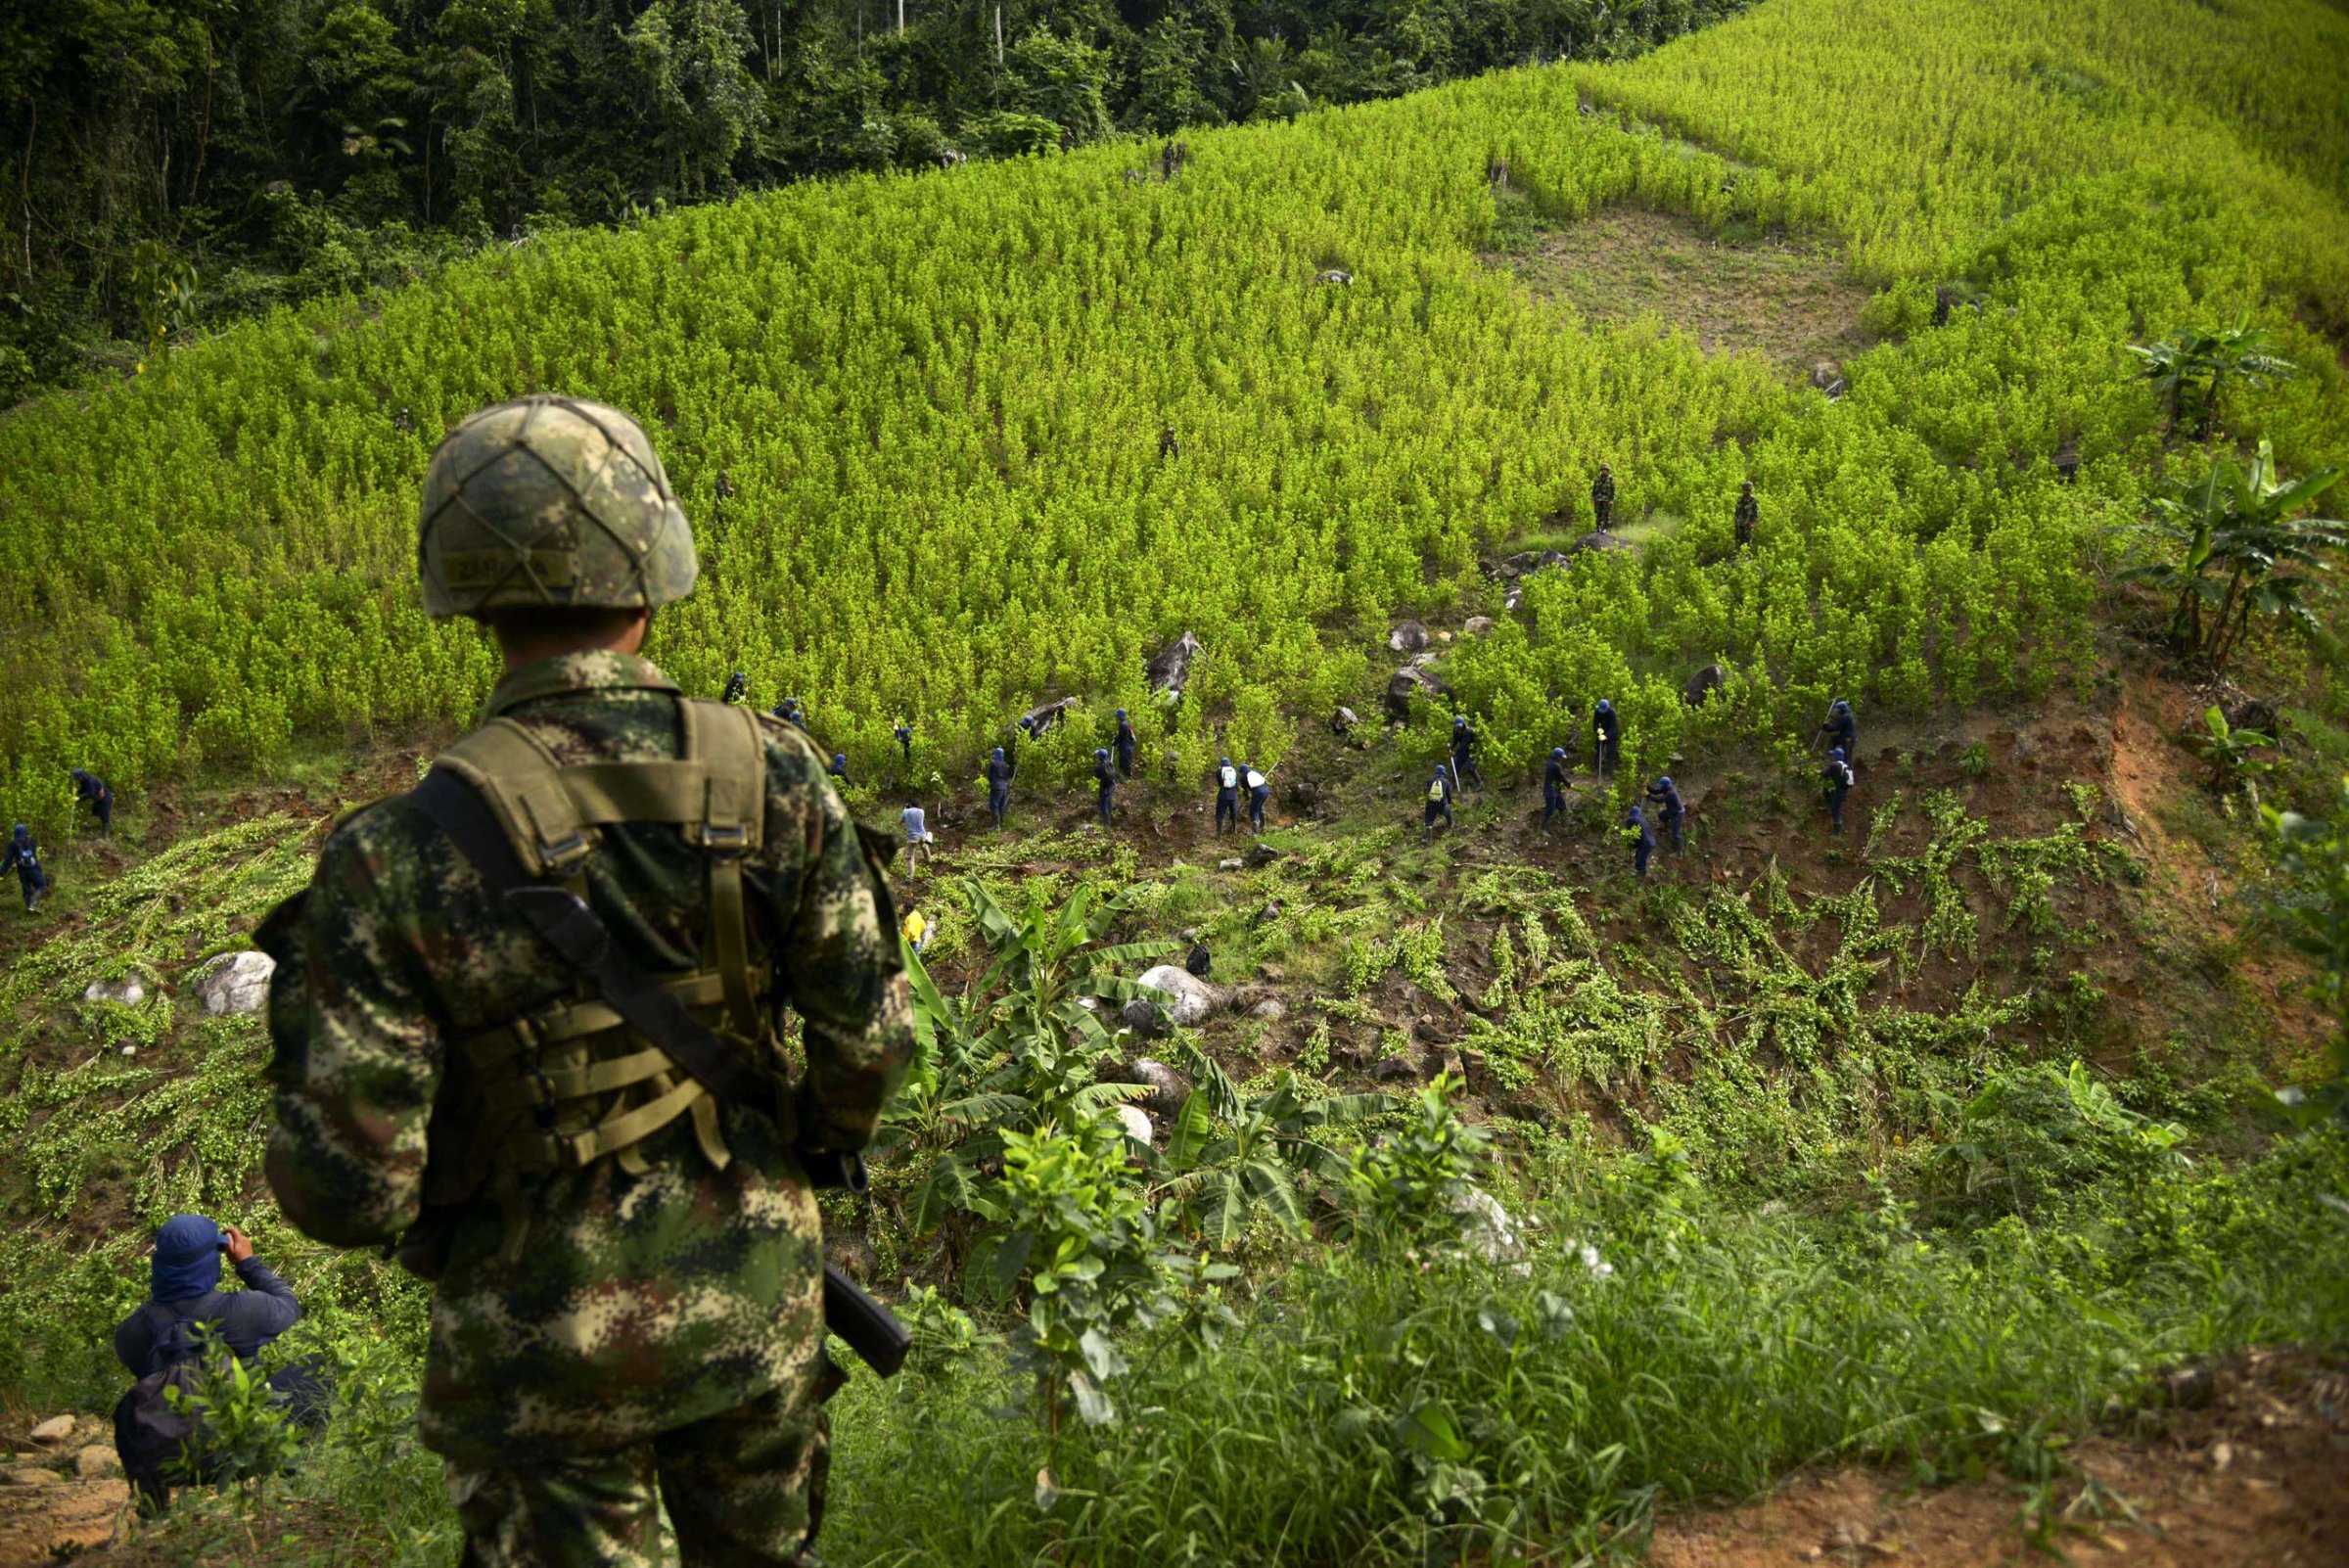 A soldier provides security to peasants eradicating coca plantations in the mountains northeast of Medellin, Colombia in 2014. Uprooting coca plants is an alternative to aerial eradication.